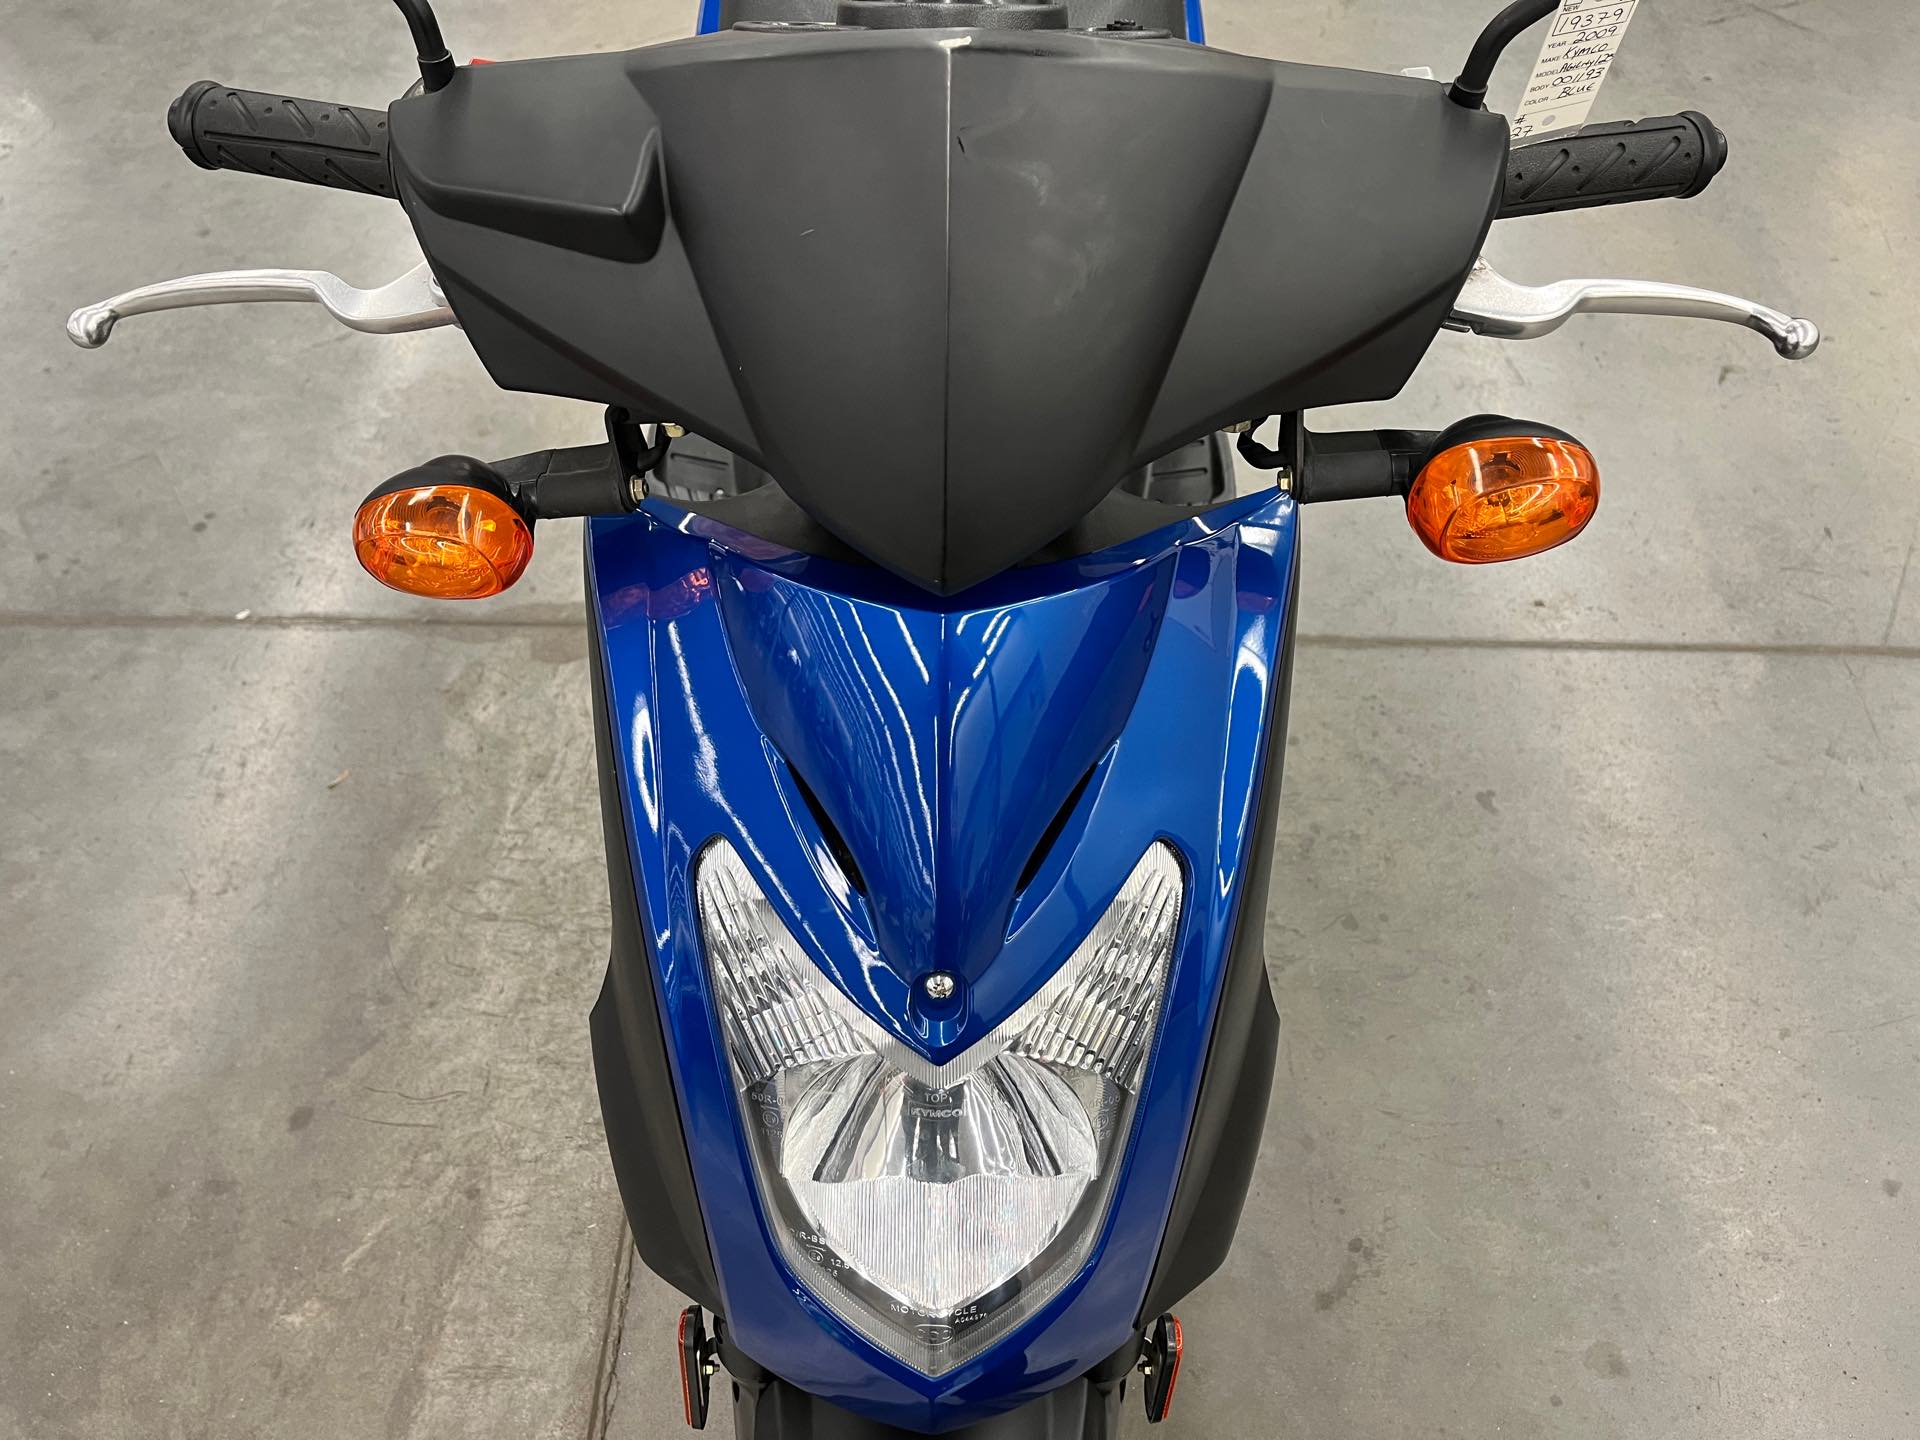 2009 KYMCO Agility 125 at Aces Motorcycles - Denver